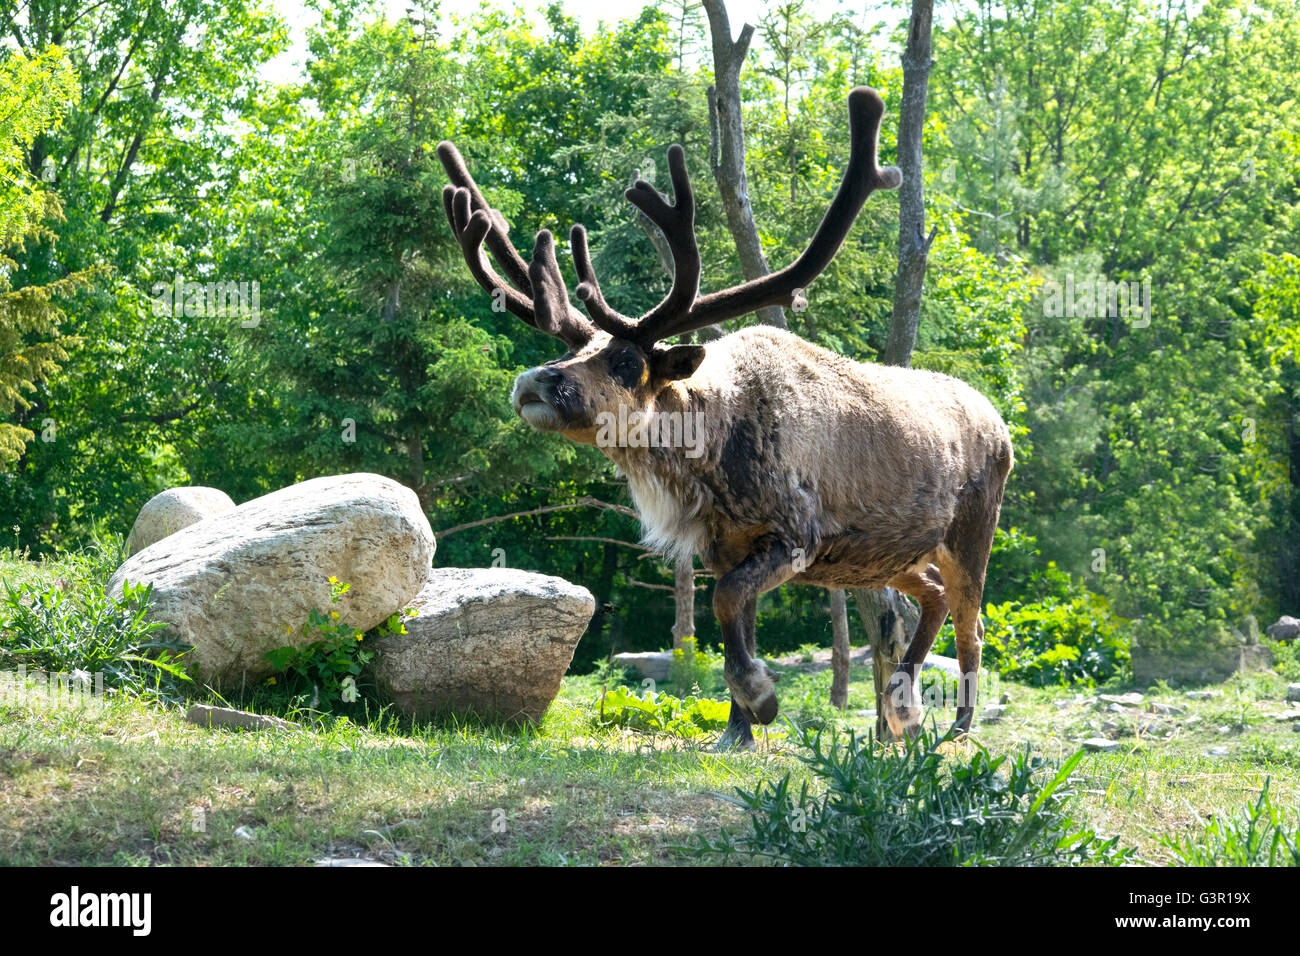 A male caribou at the Ecomuseum, with antlers covered in velvet. Stock Photo